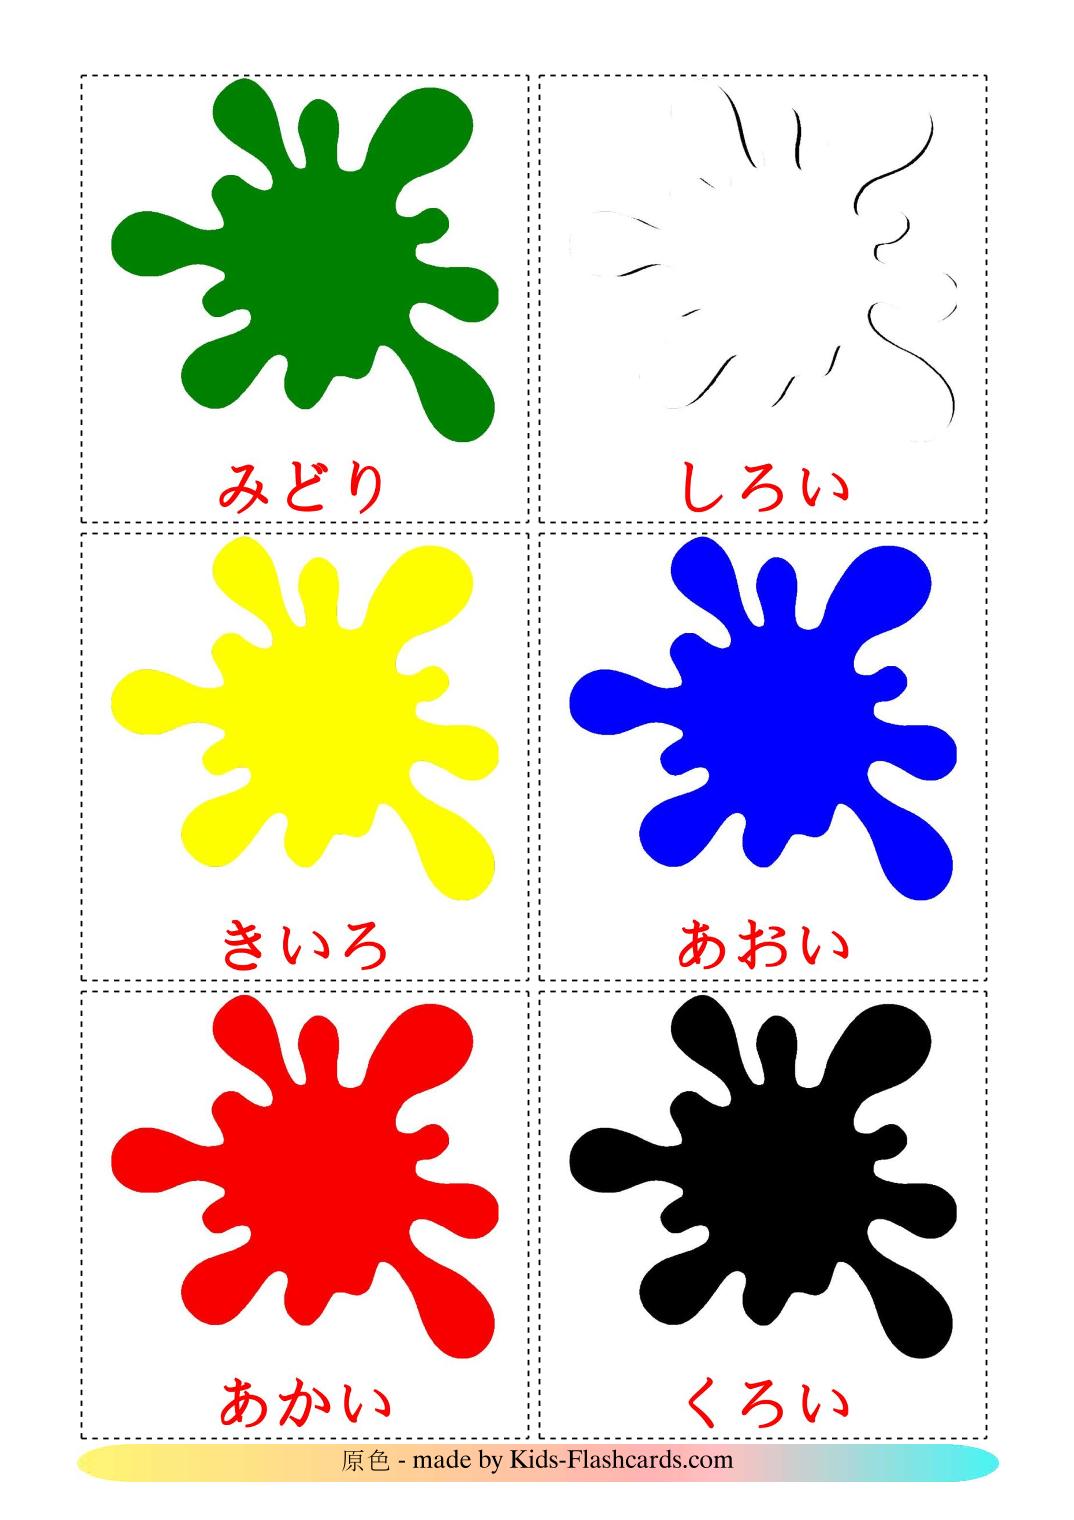 Base colors - 12 Free Printable japanese Flashcards 